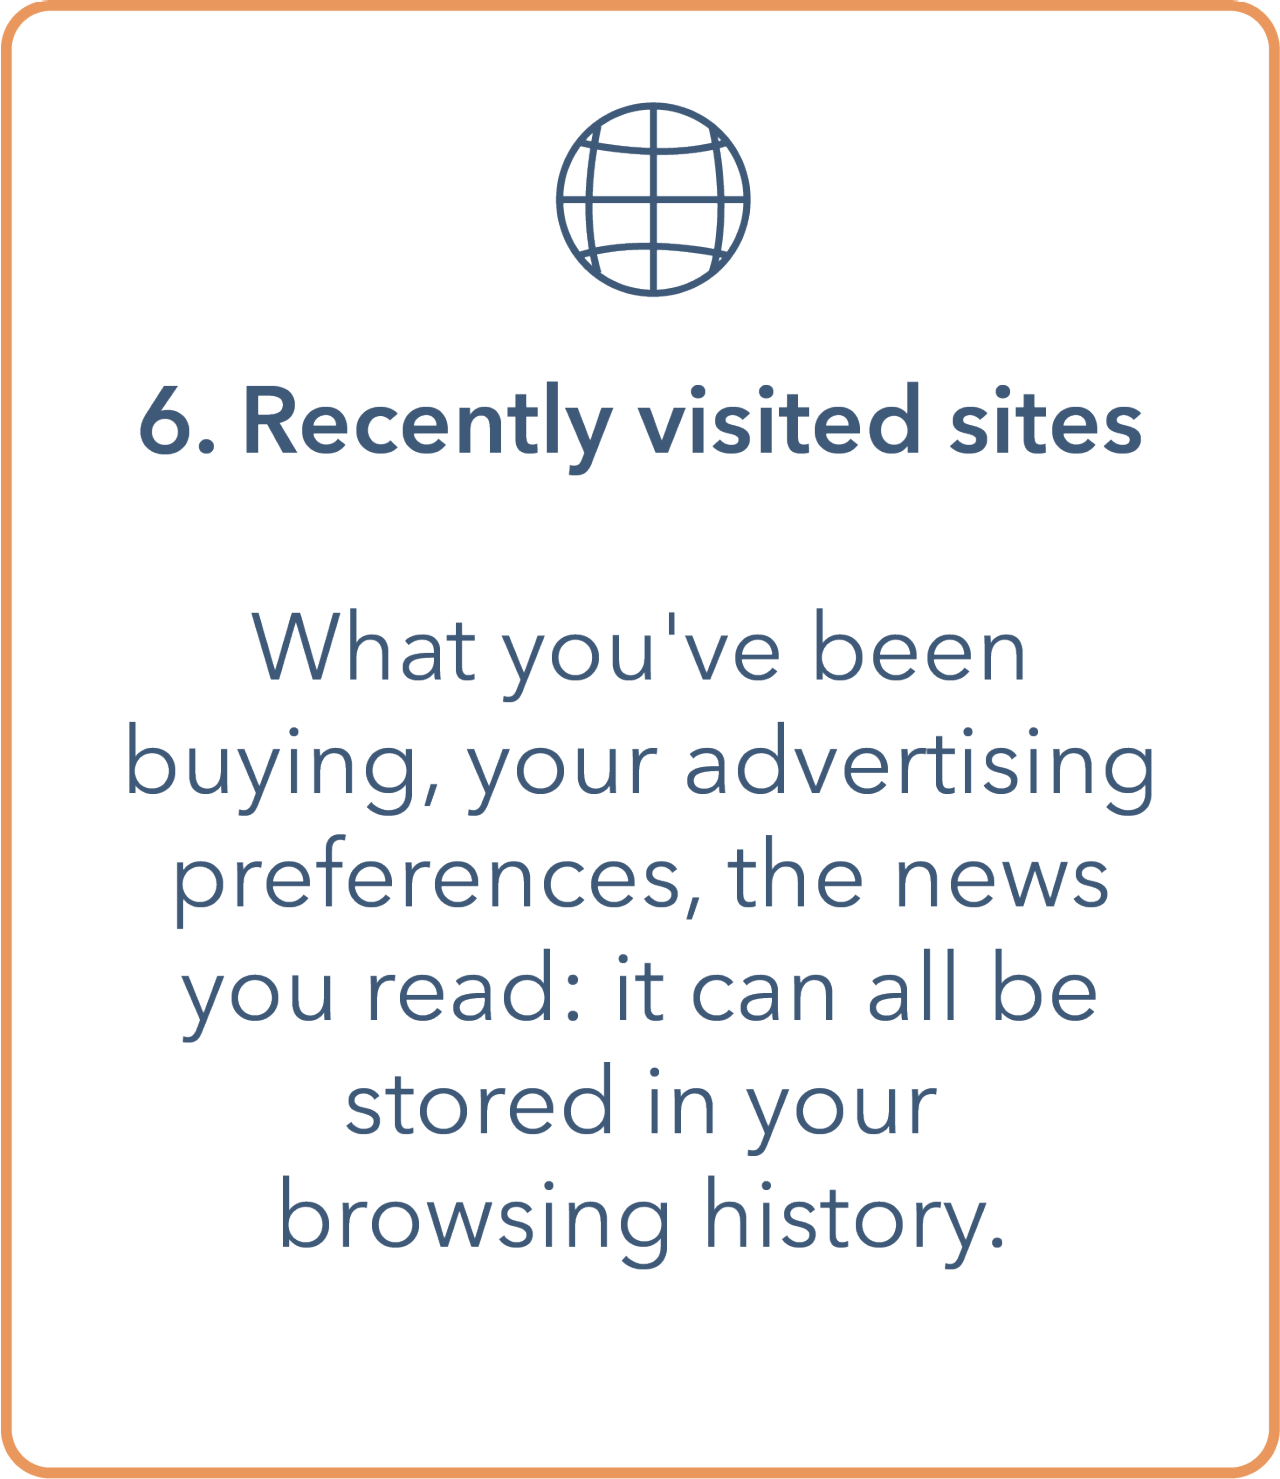 Image shows a tile containing an outline of the network vector globe symbol at the top. Underneath is a bullet point containing '6. Recently visited sites'. The main body contains 'what you've been buying, your advertising preferences, the news you read: it can all be stored in your browsing history.' Tile has an orange outline border and text is in dark blue.